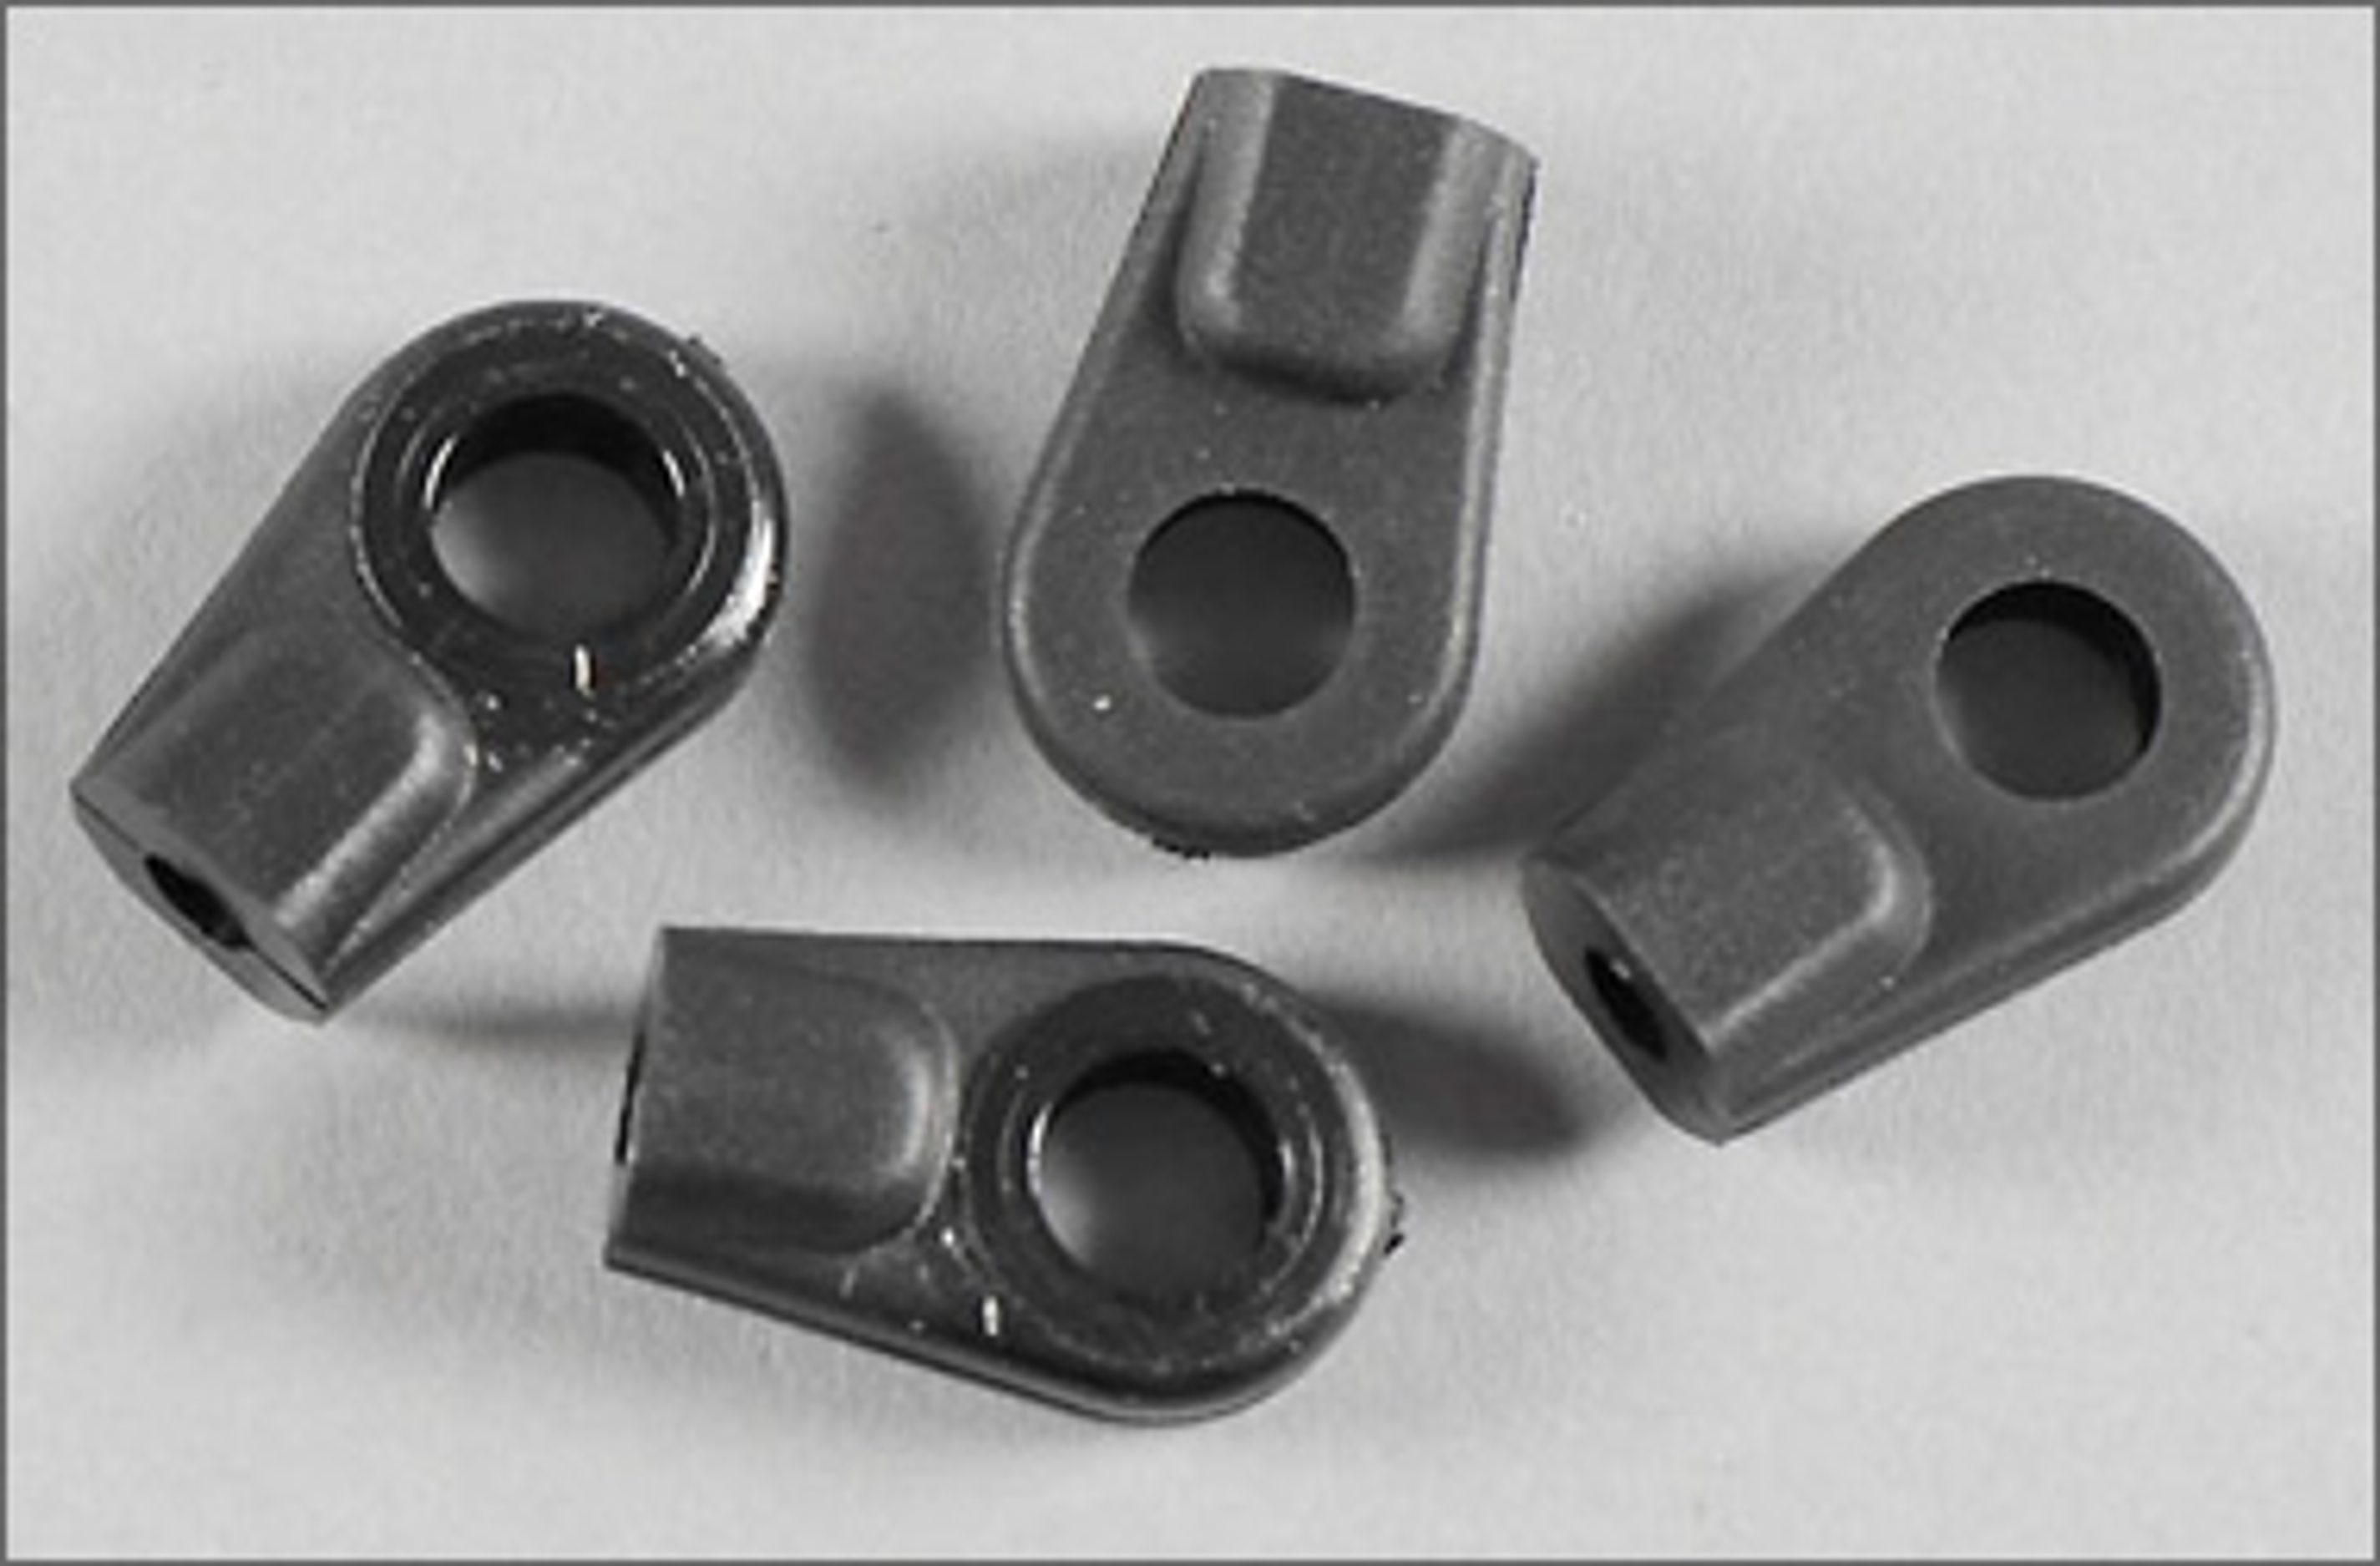 67260/05 FG Ball-and-socket joint 7mm for Leopard 2WD/4WD, 4pcs.